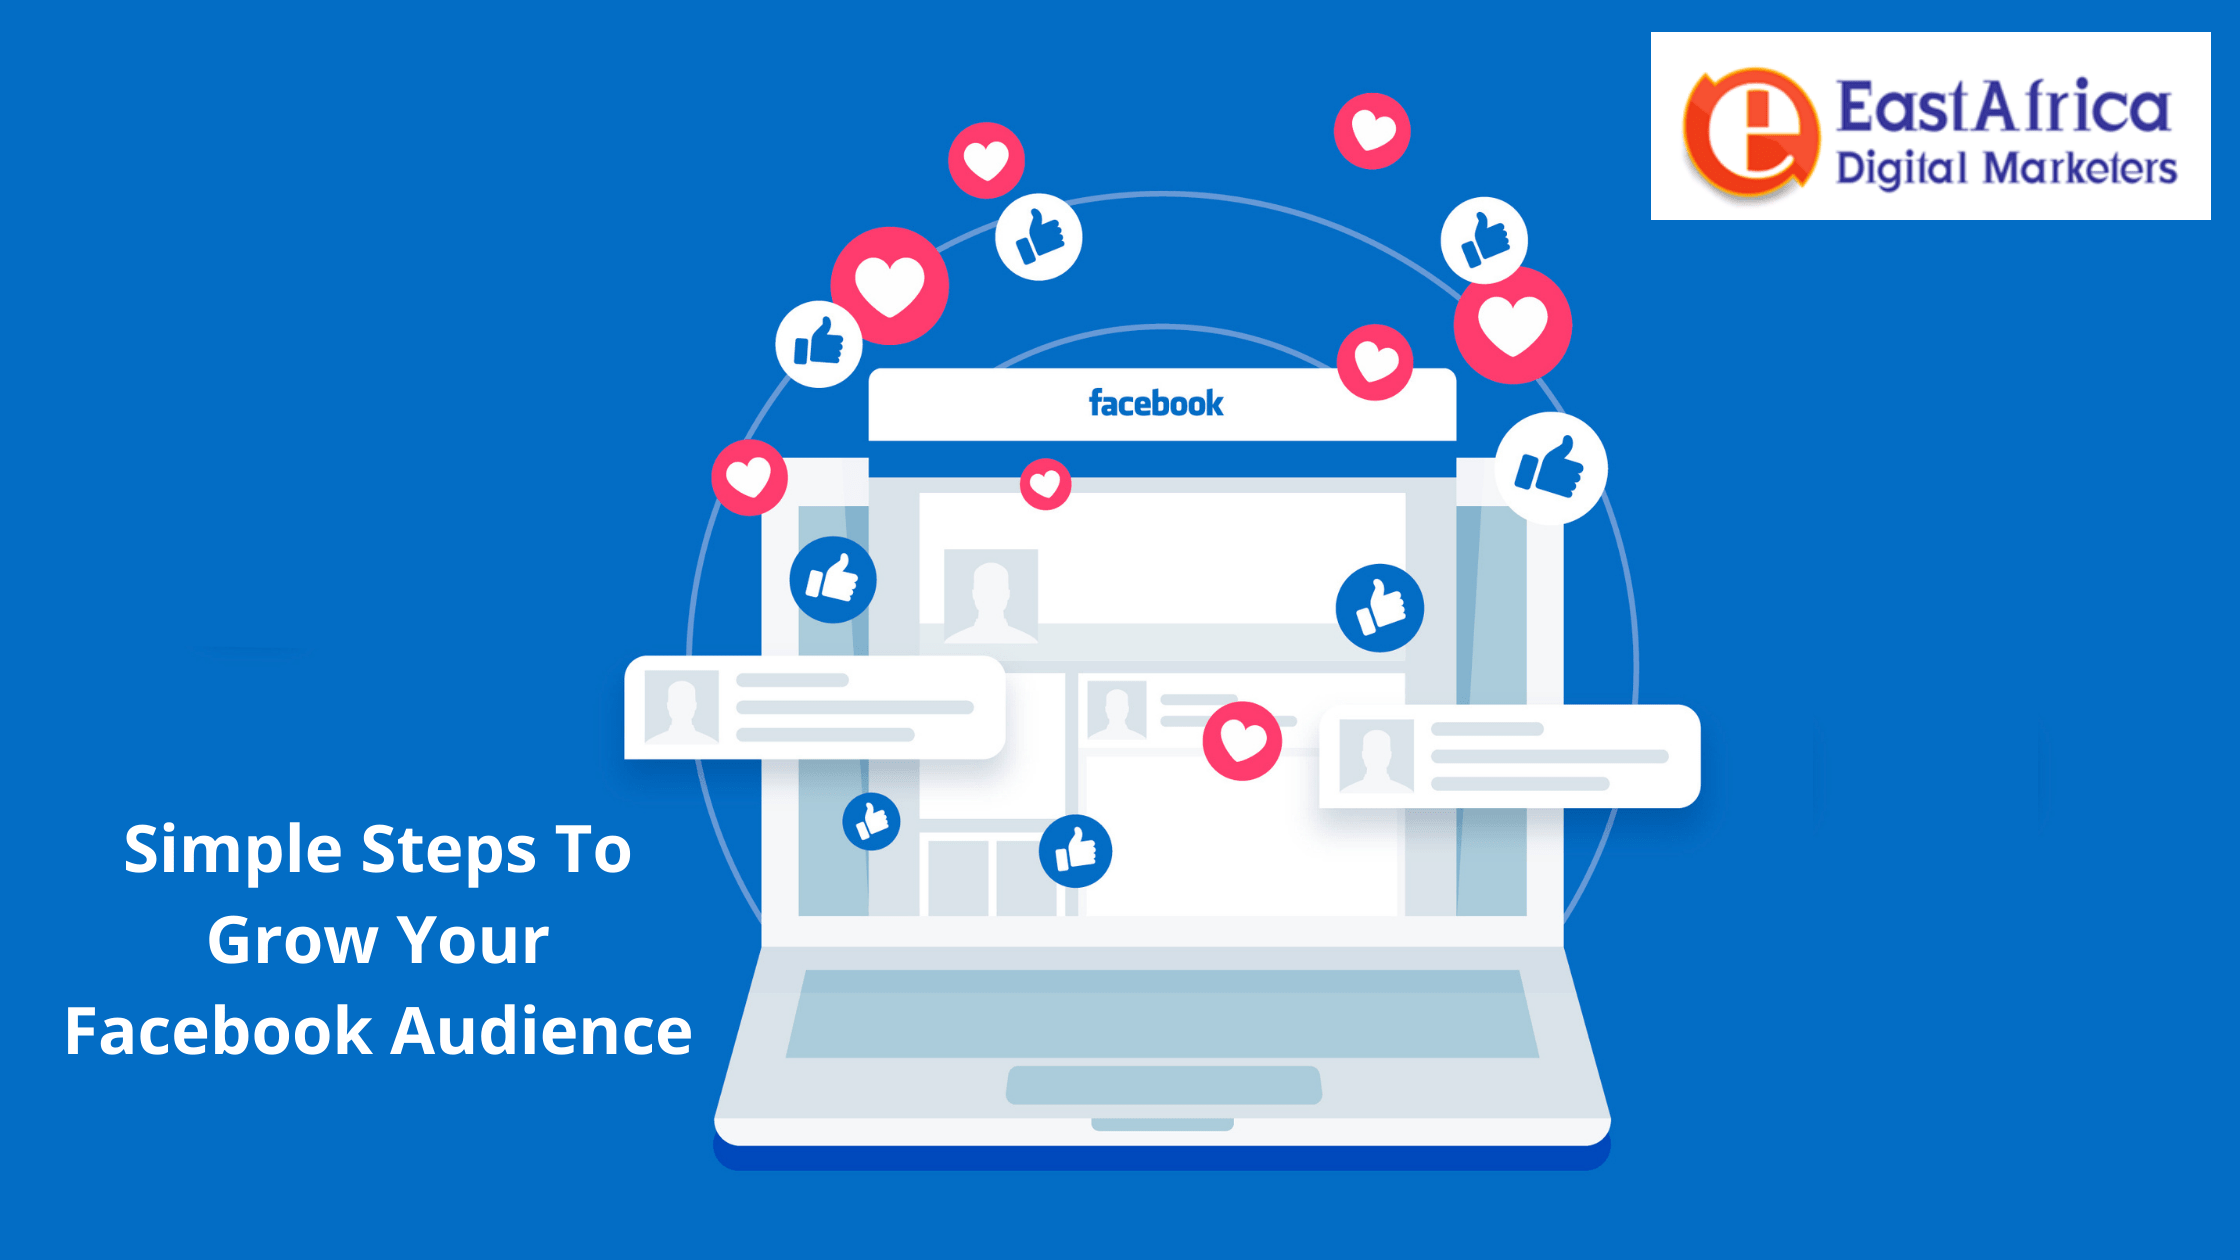 Simple Steps To Grow Your Facebook Audience